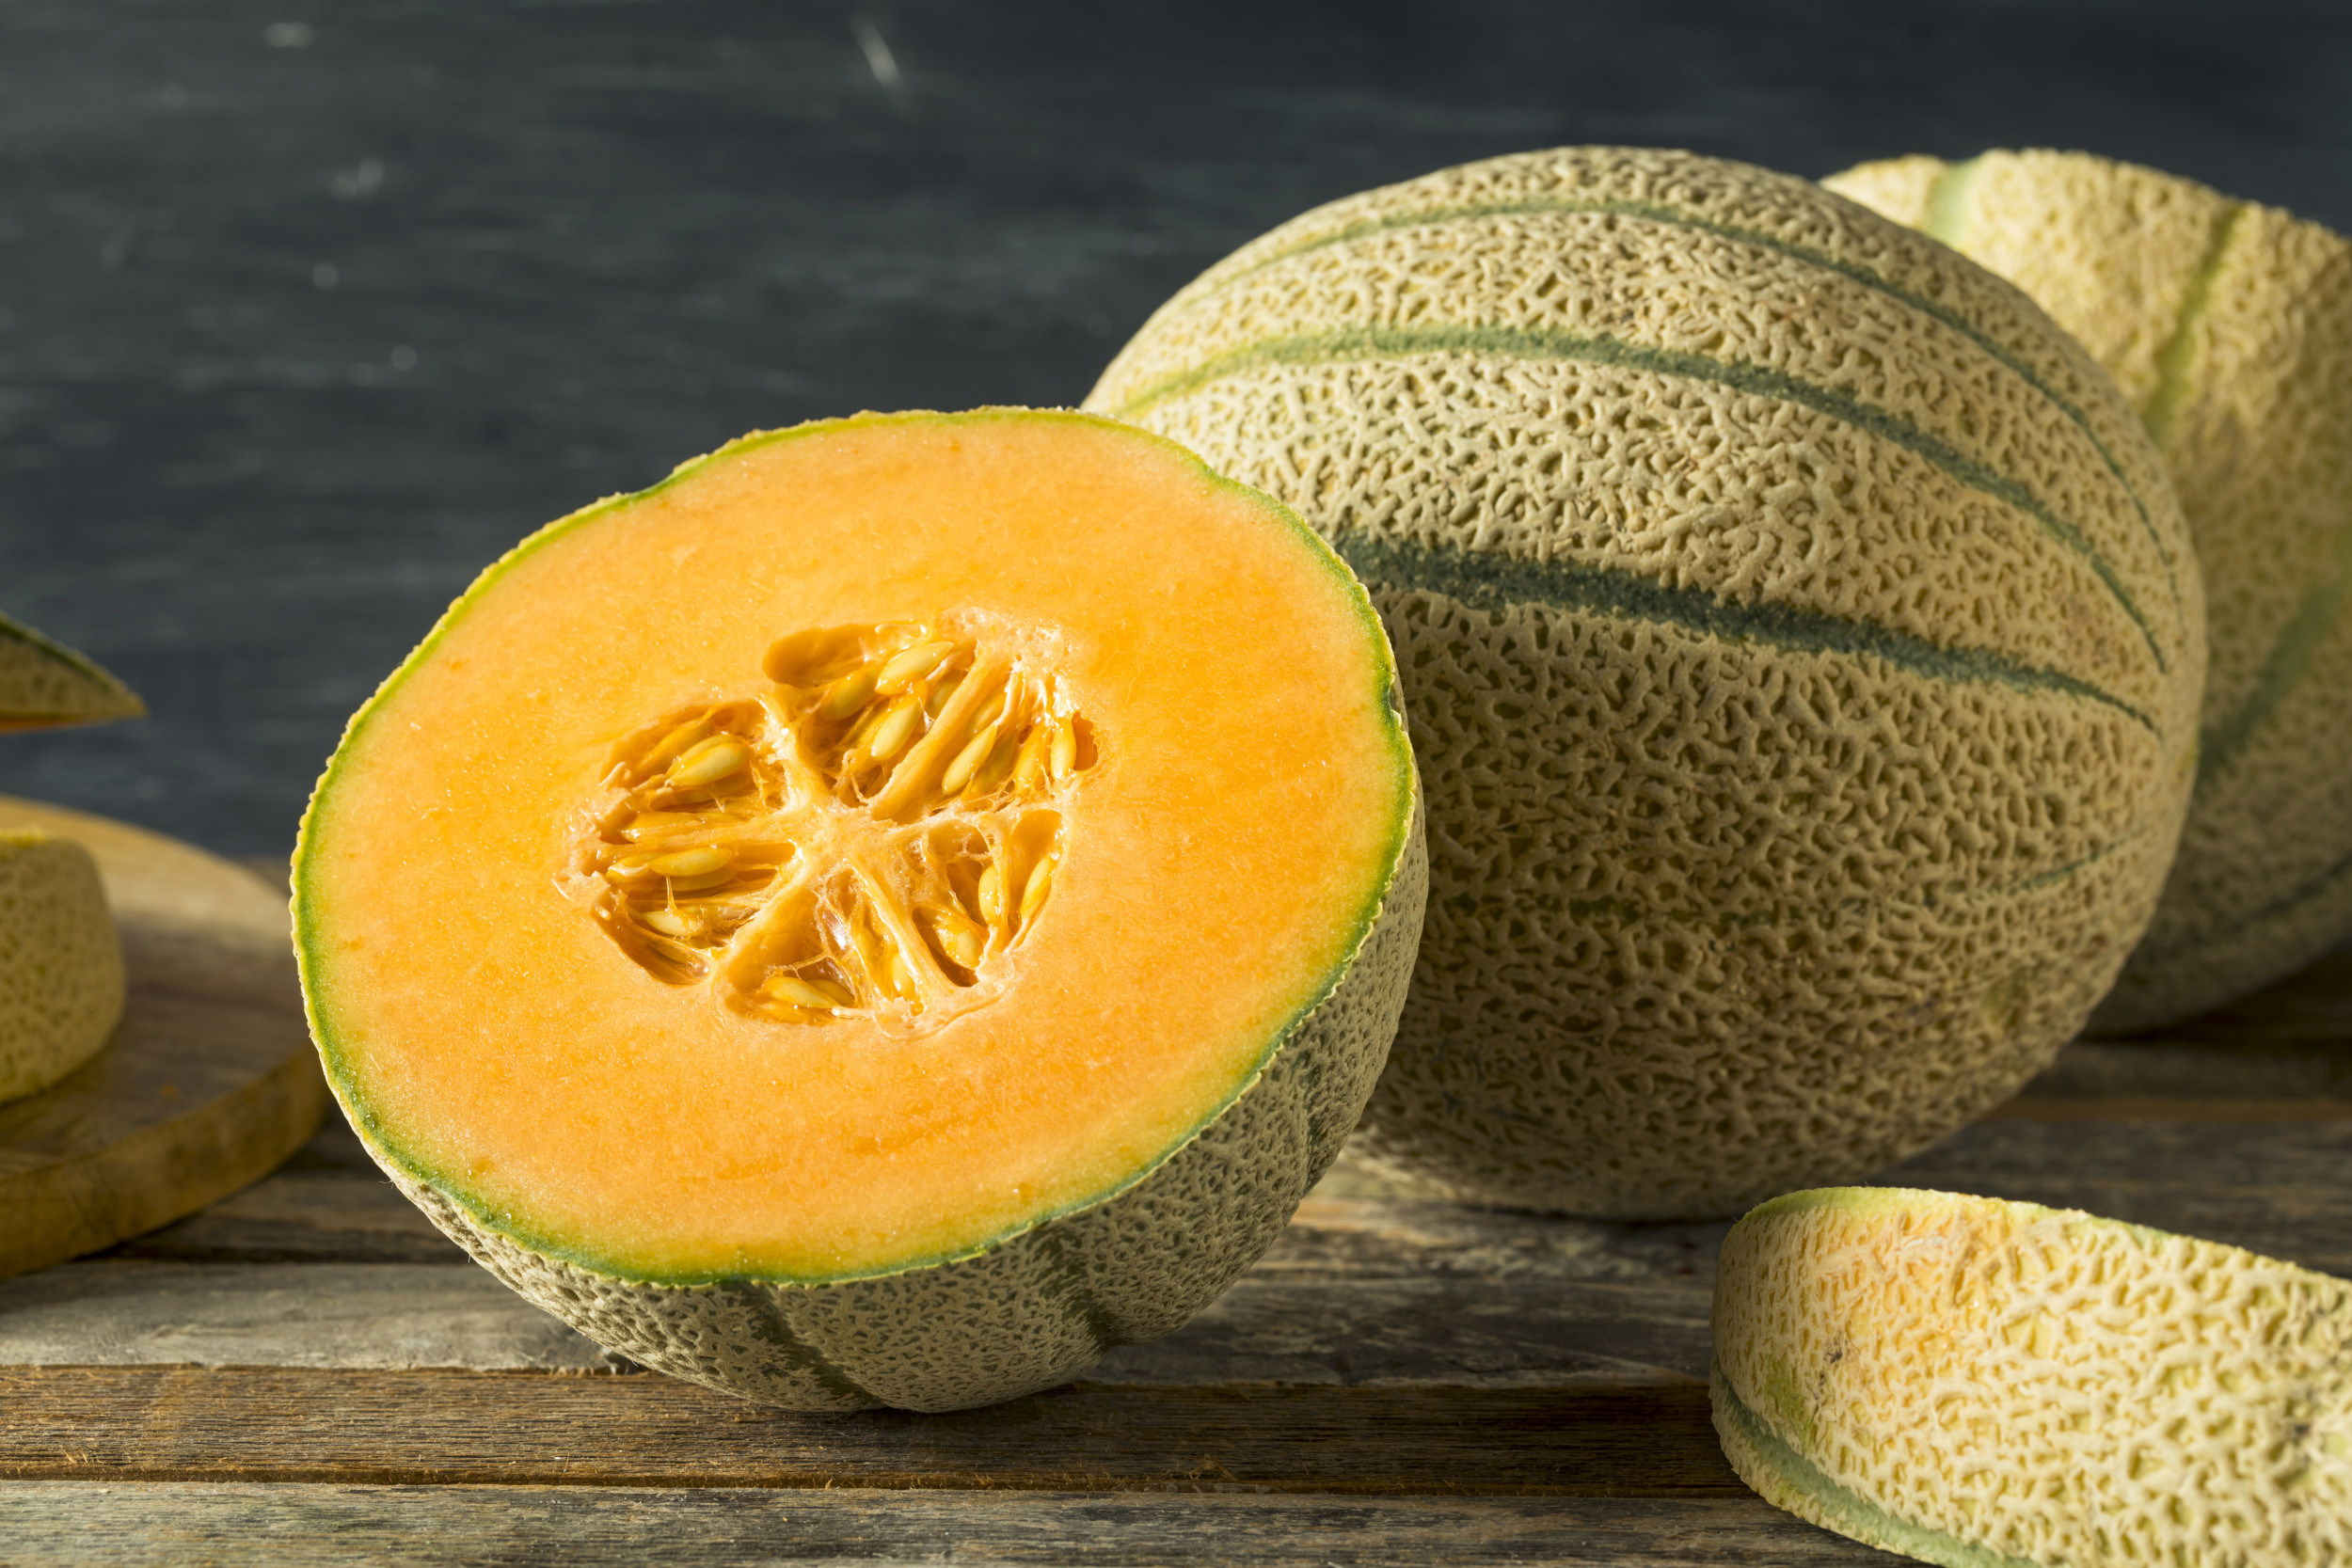 Cantaloupe Recall As Three Companies Pull Products Over Salmonella Fears